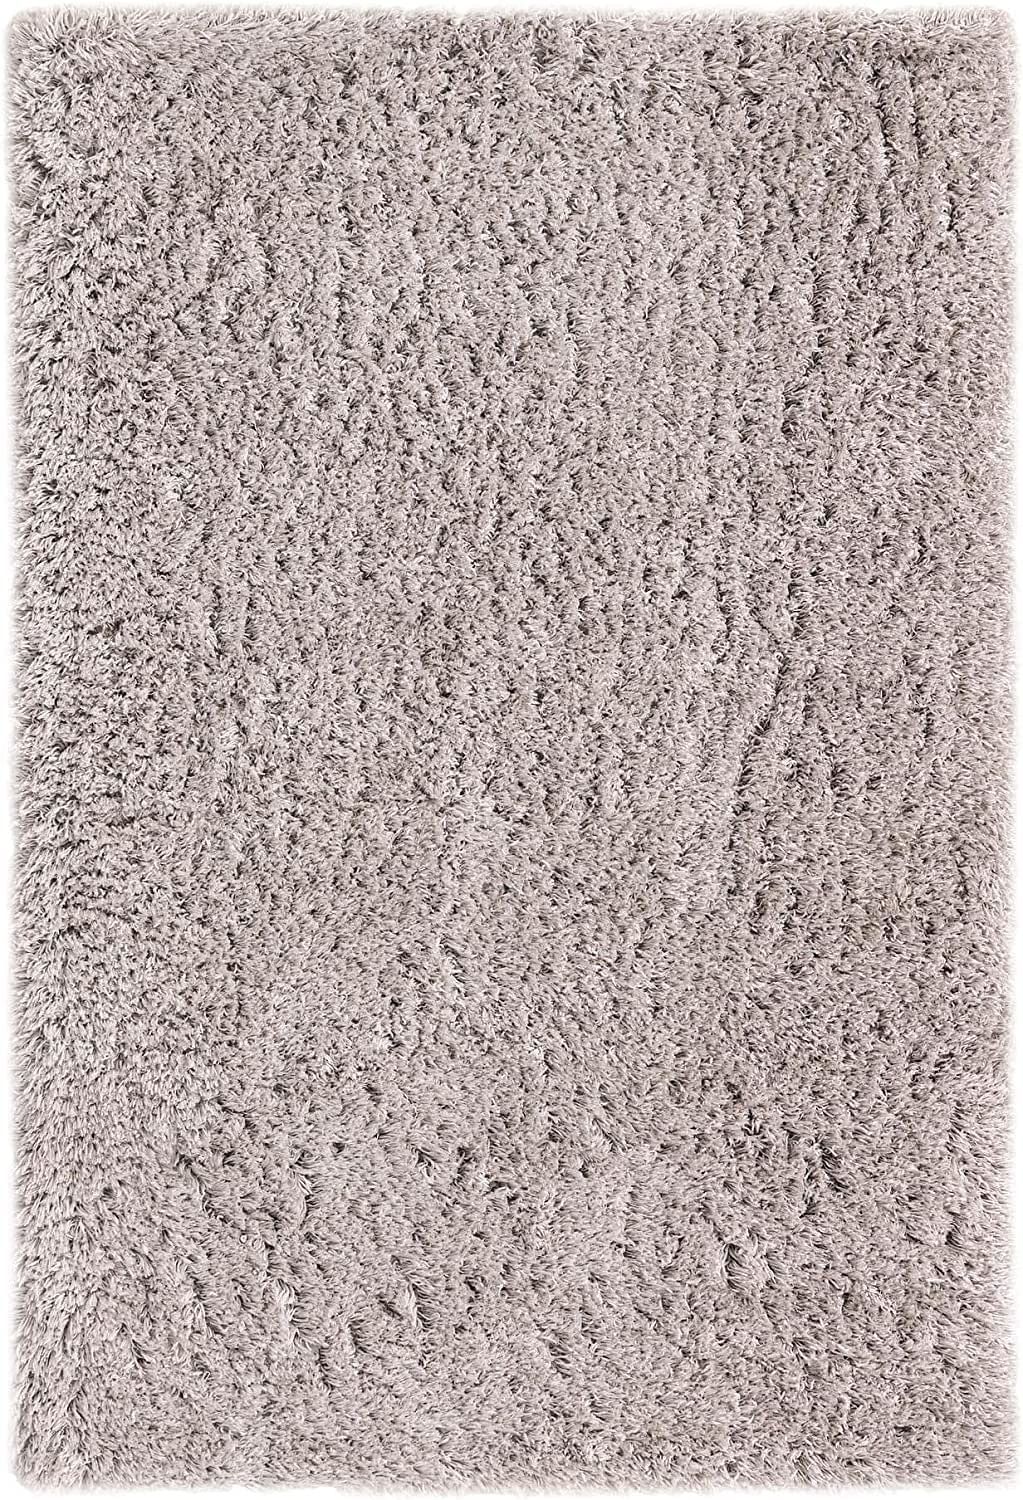 Rugs Infinity Collection Solid Shag Area Rug | Ubuy India Within Ash Infinity Shag Rugs (View 6 of 15)